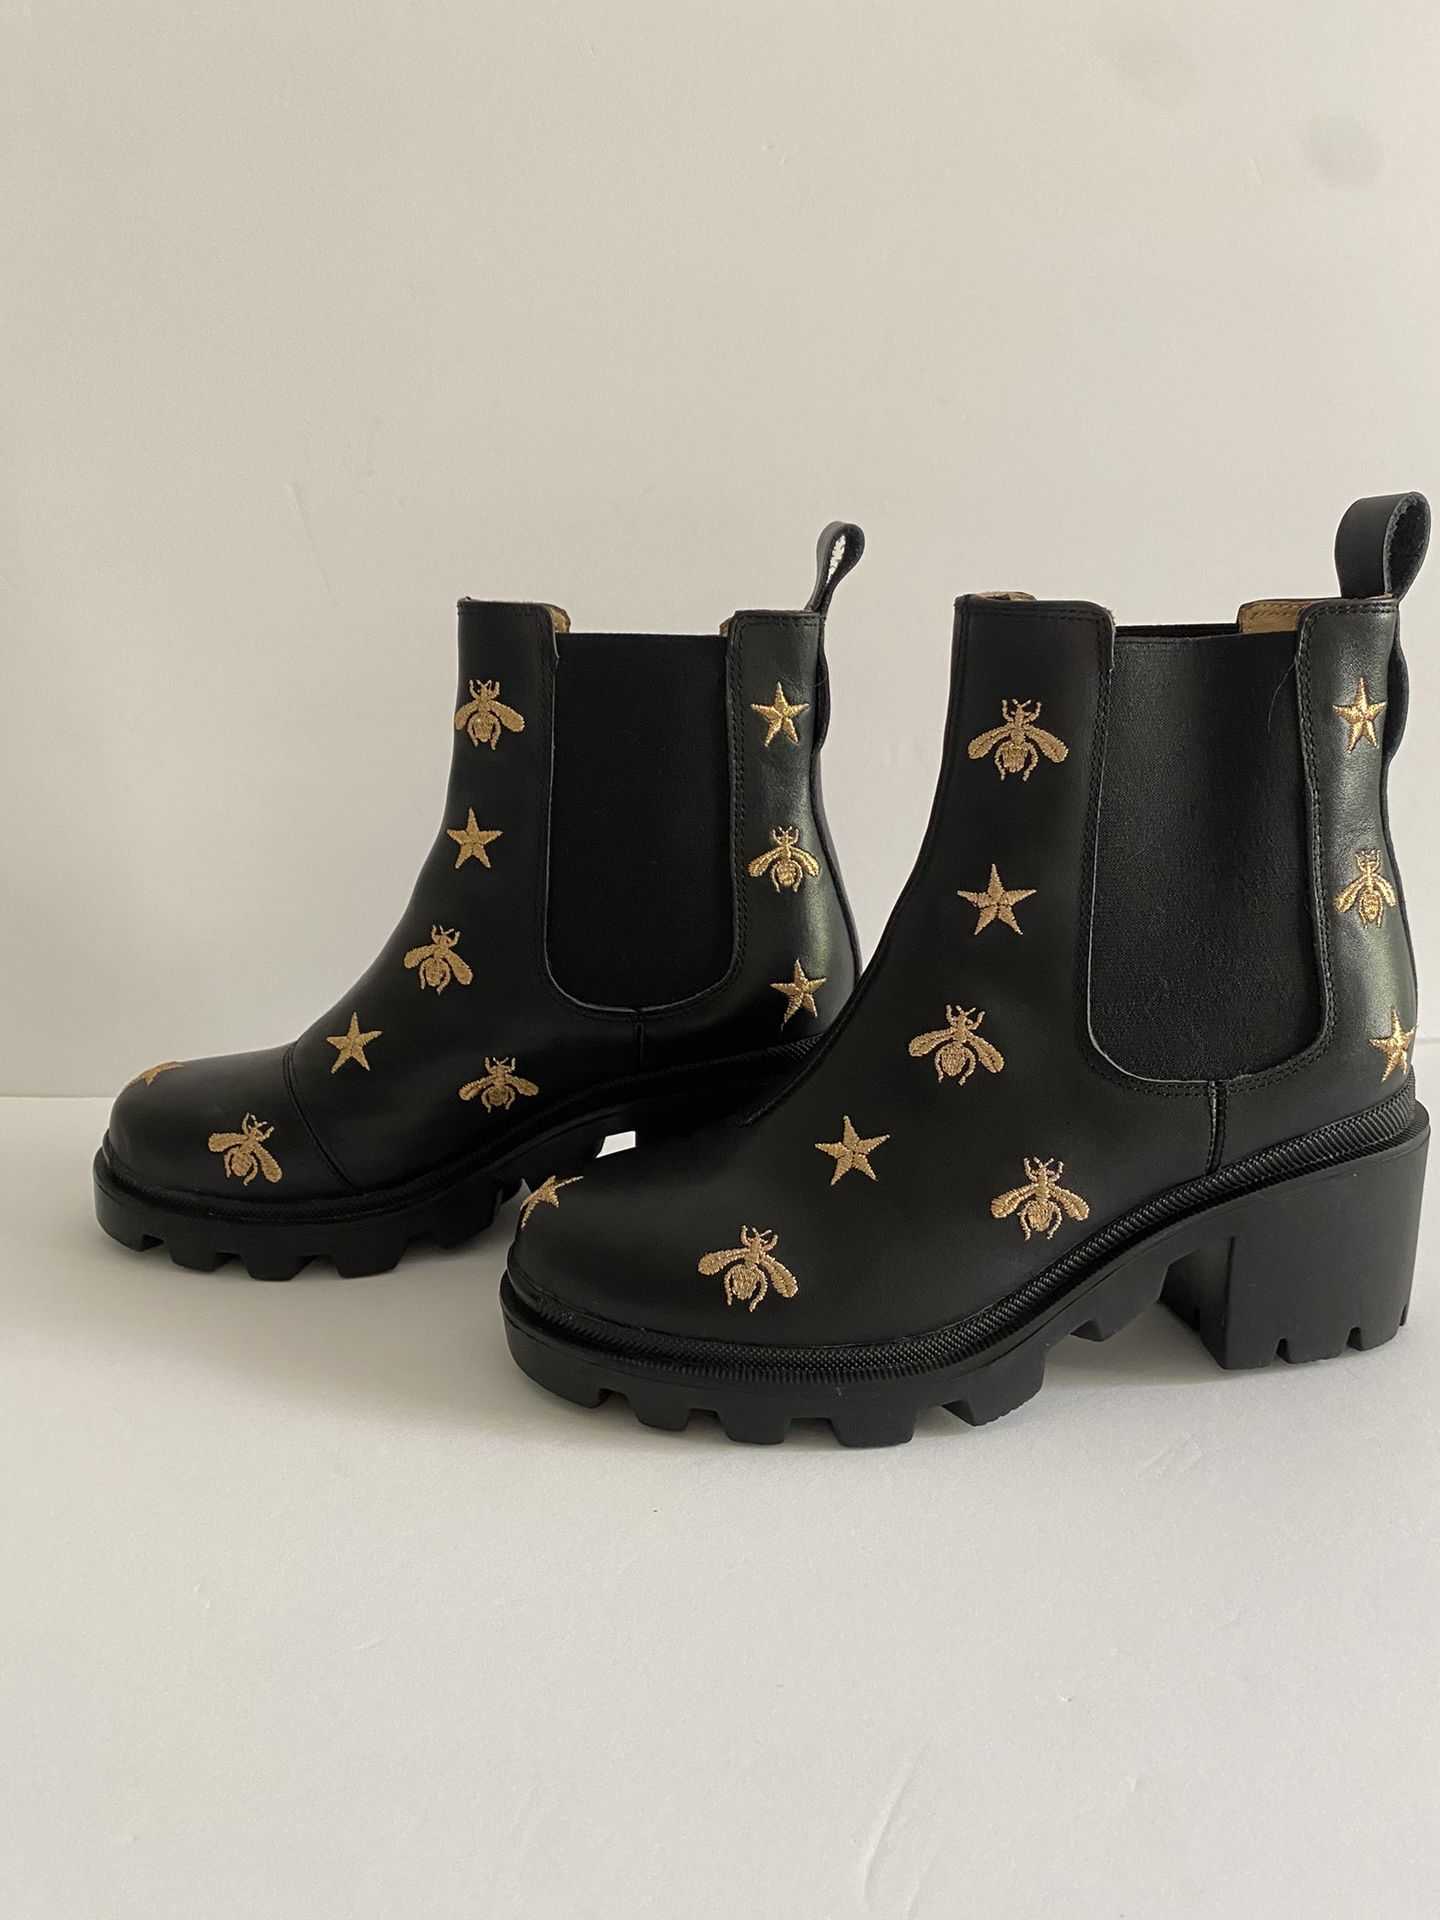 Gucci Ankle Boots Women’s Signature Gucci Bee & Star.  Size 38 US 7.5